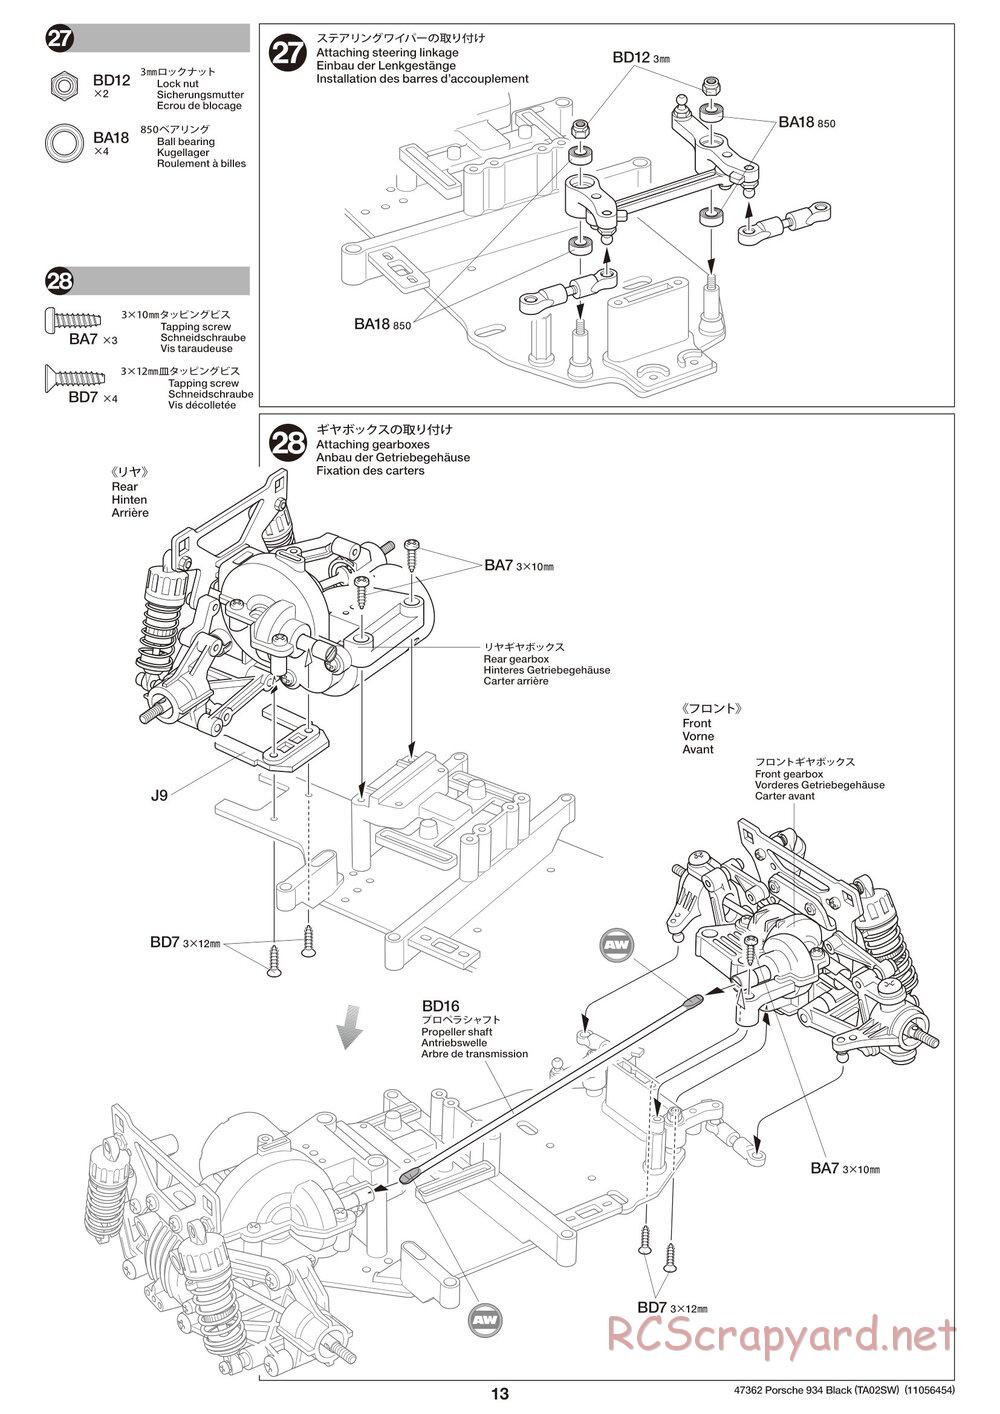 Tamiya - TT-02 White Special Chassis - Manual - Page 13